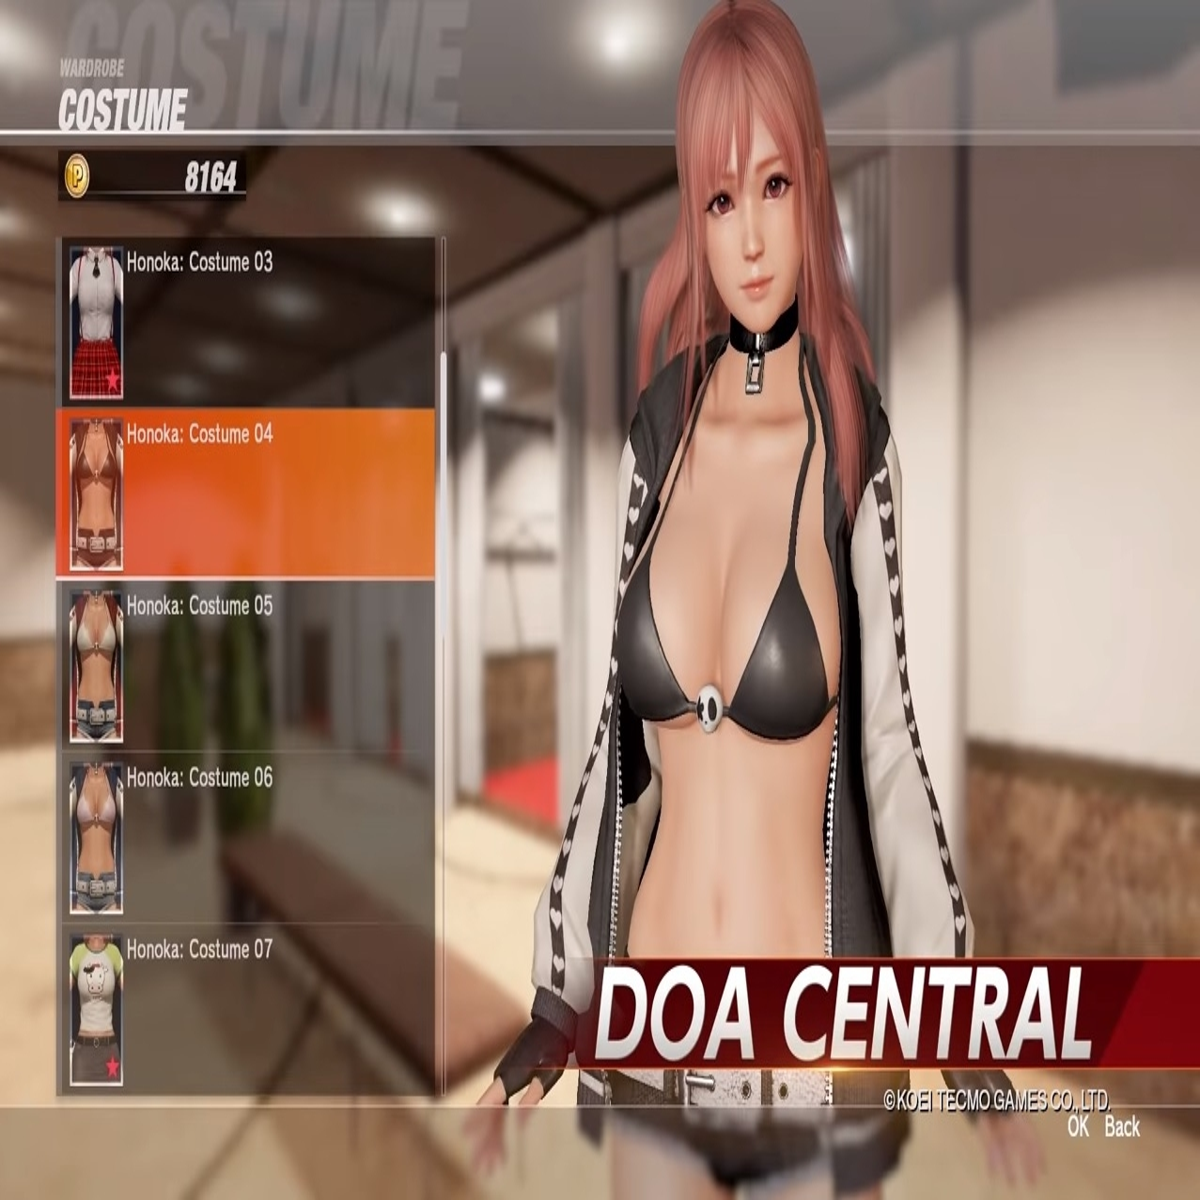 Dead or Alive 6 designer says the characters aren't as sexualized